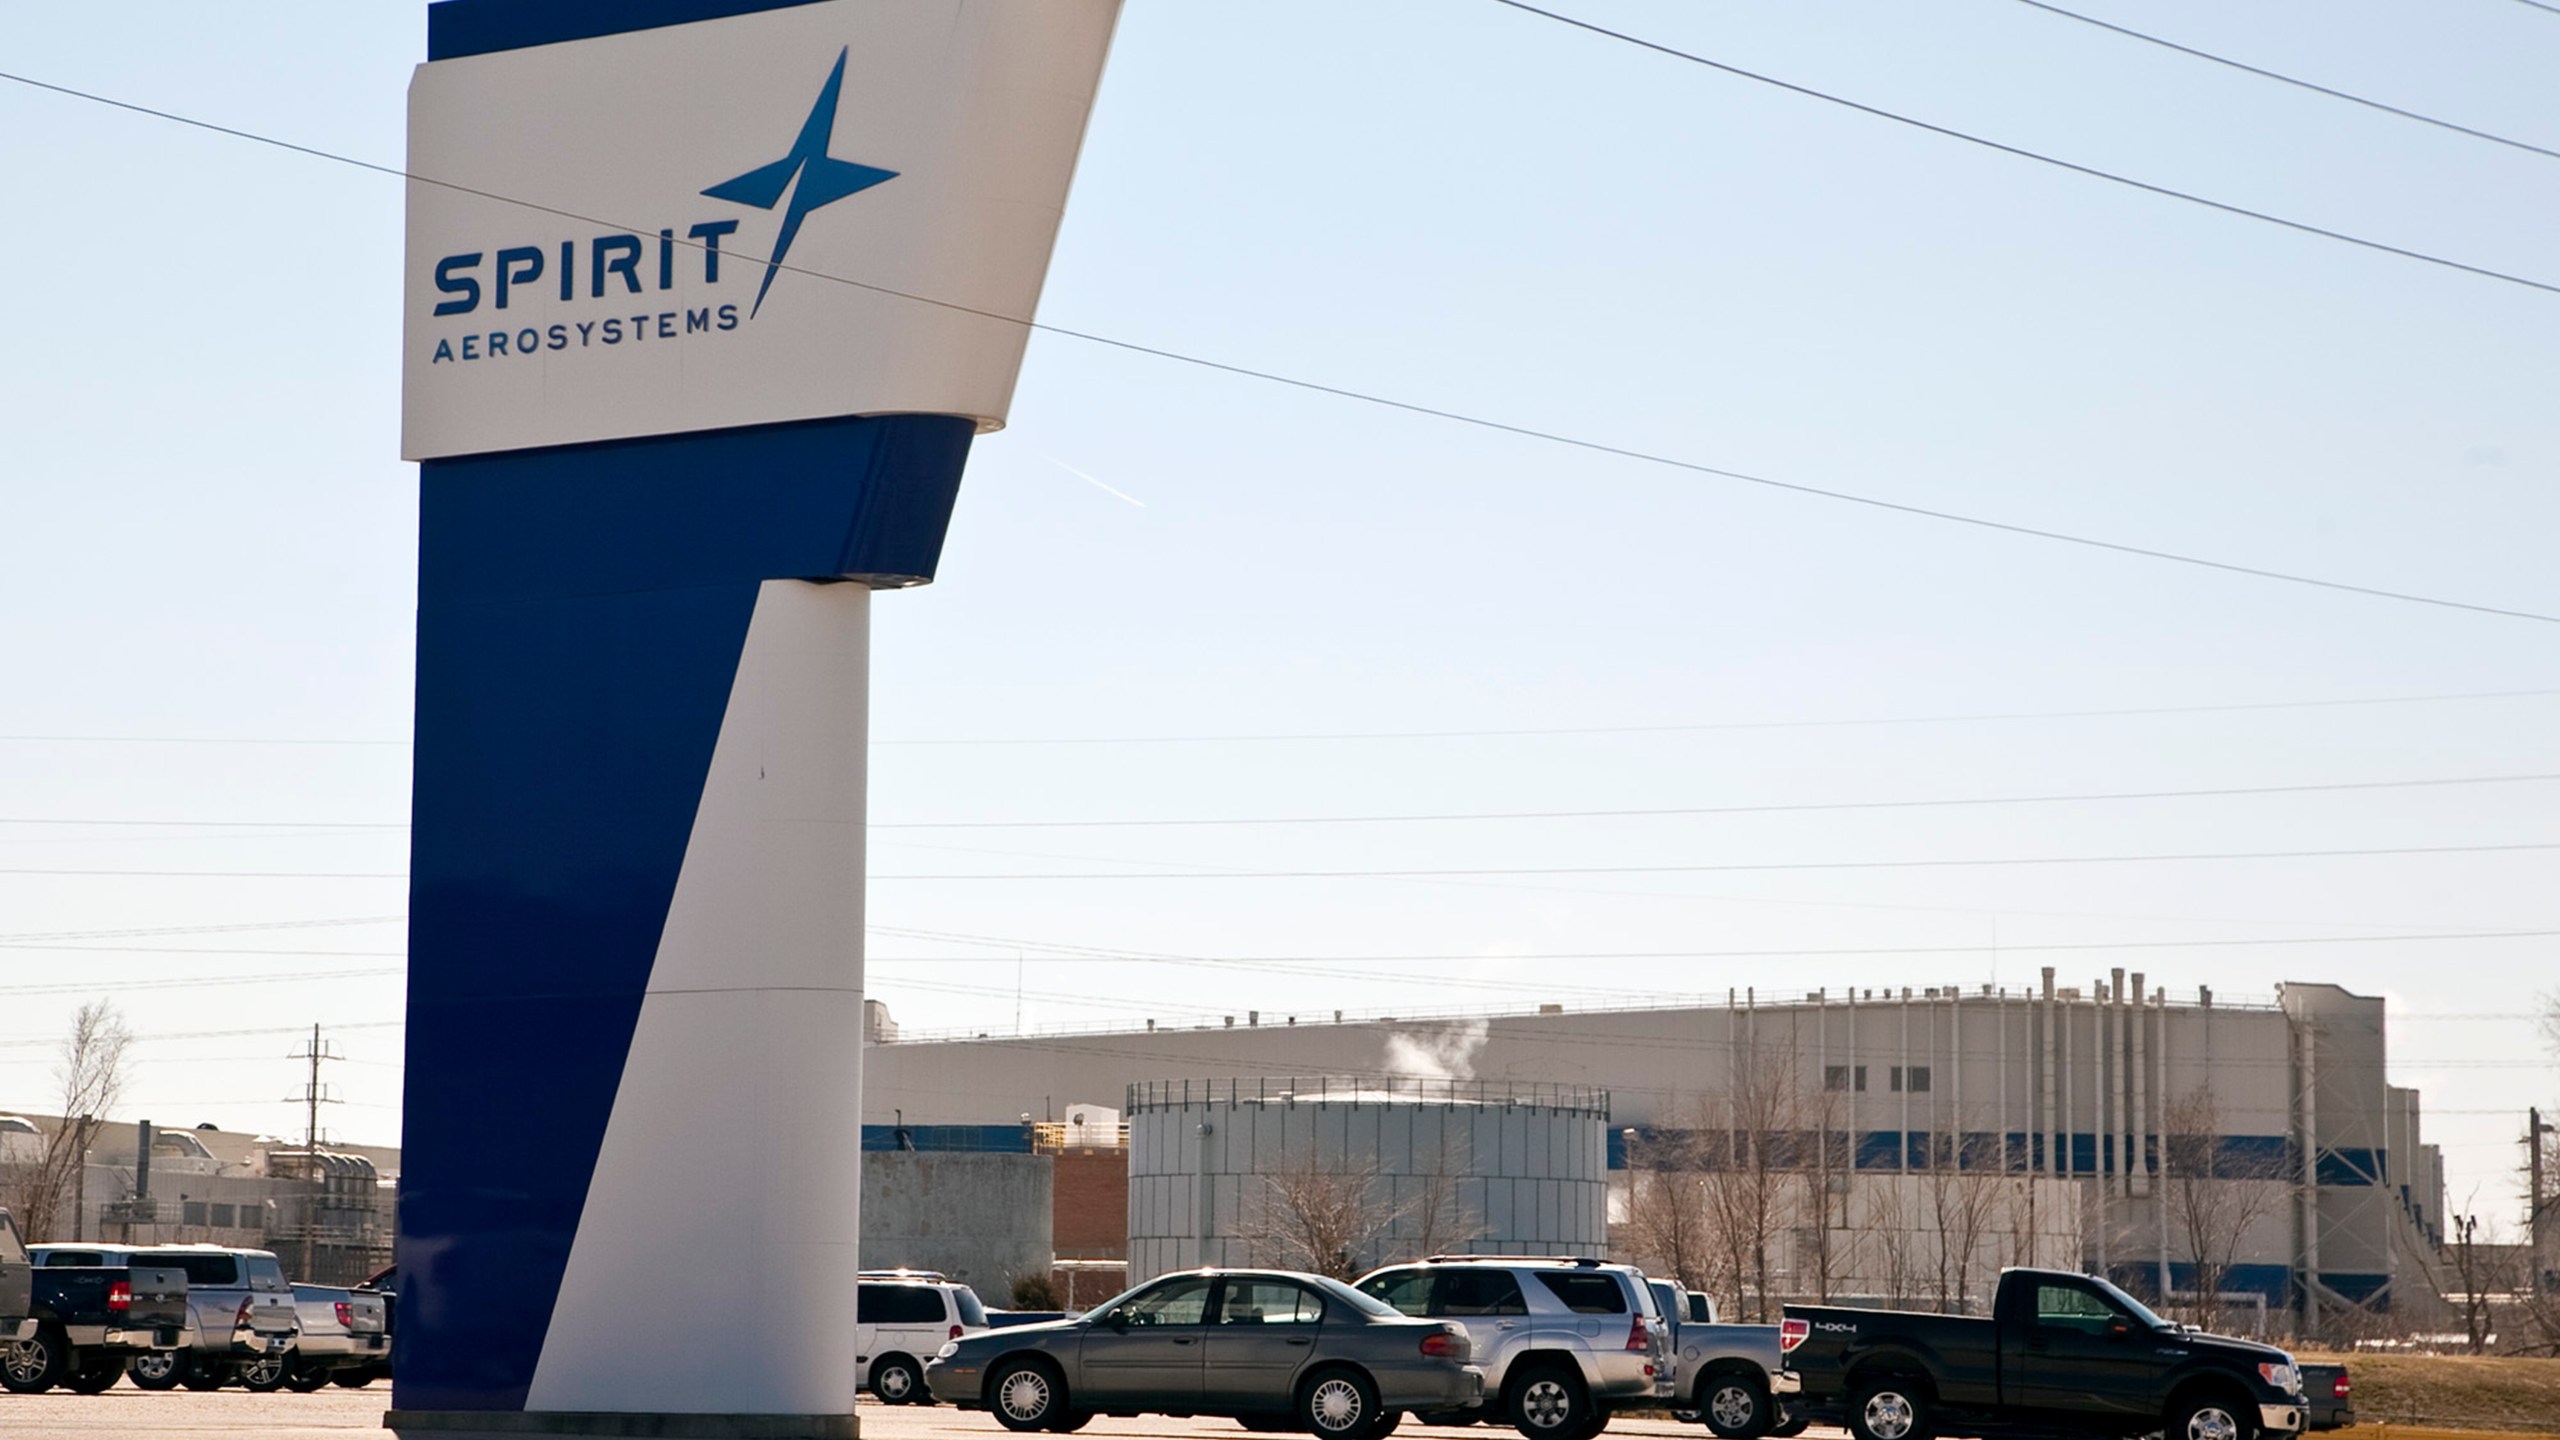 FILE - The Spirit AeroSystems sign is pictured, July 25, 2013, in Wichita, Kan. Boeing announced plans late Sunday, June 30, 2024, to acquire Spirit AeroSystems for $4.7 billion in an all-stock transaction for the manufacturing firm. (Mike Hutmacher/The Wichita Eagle via AP, File)